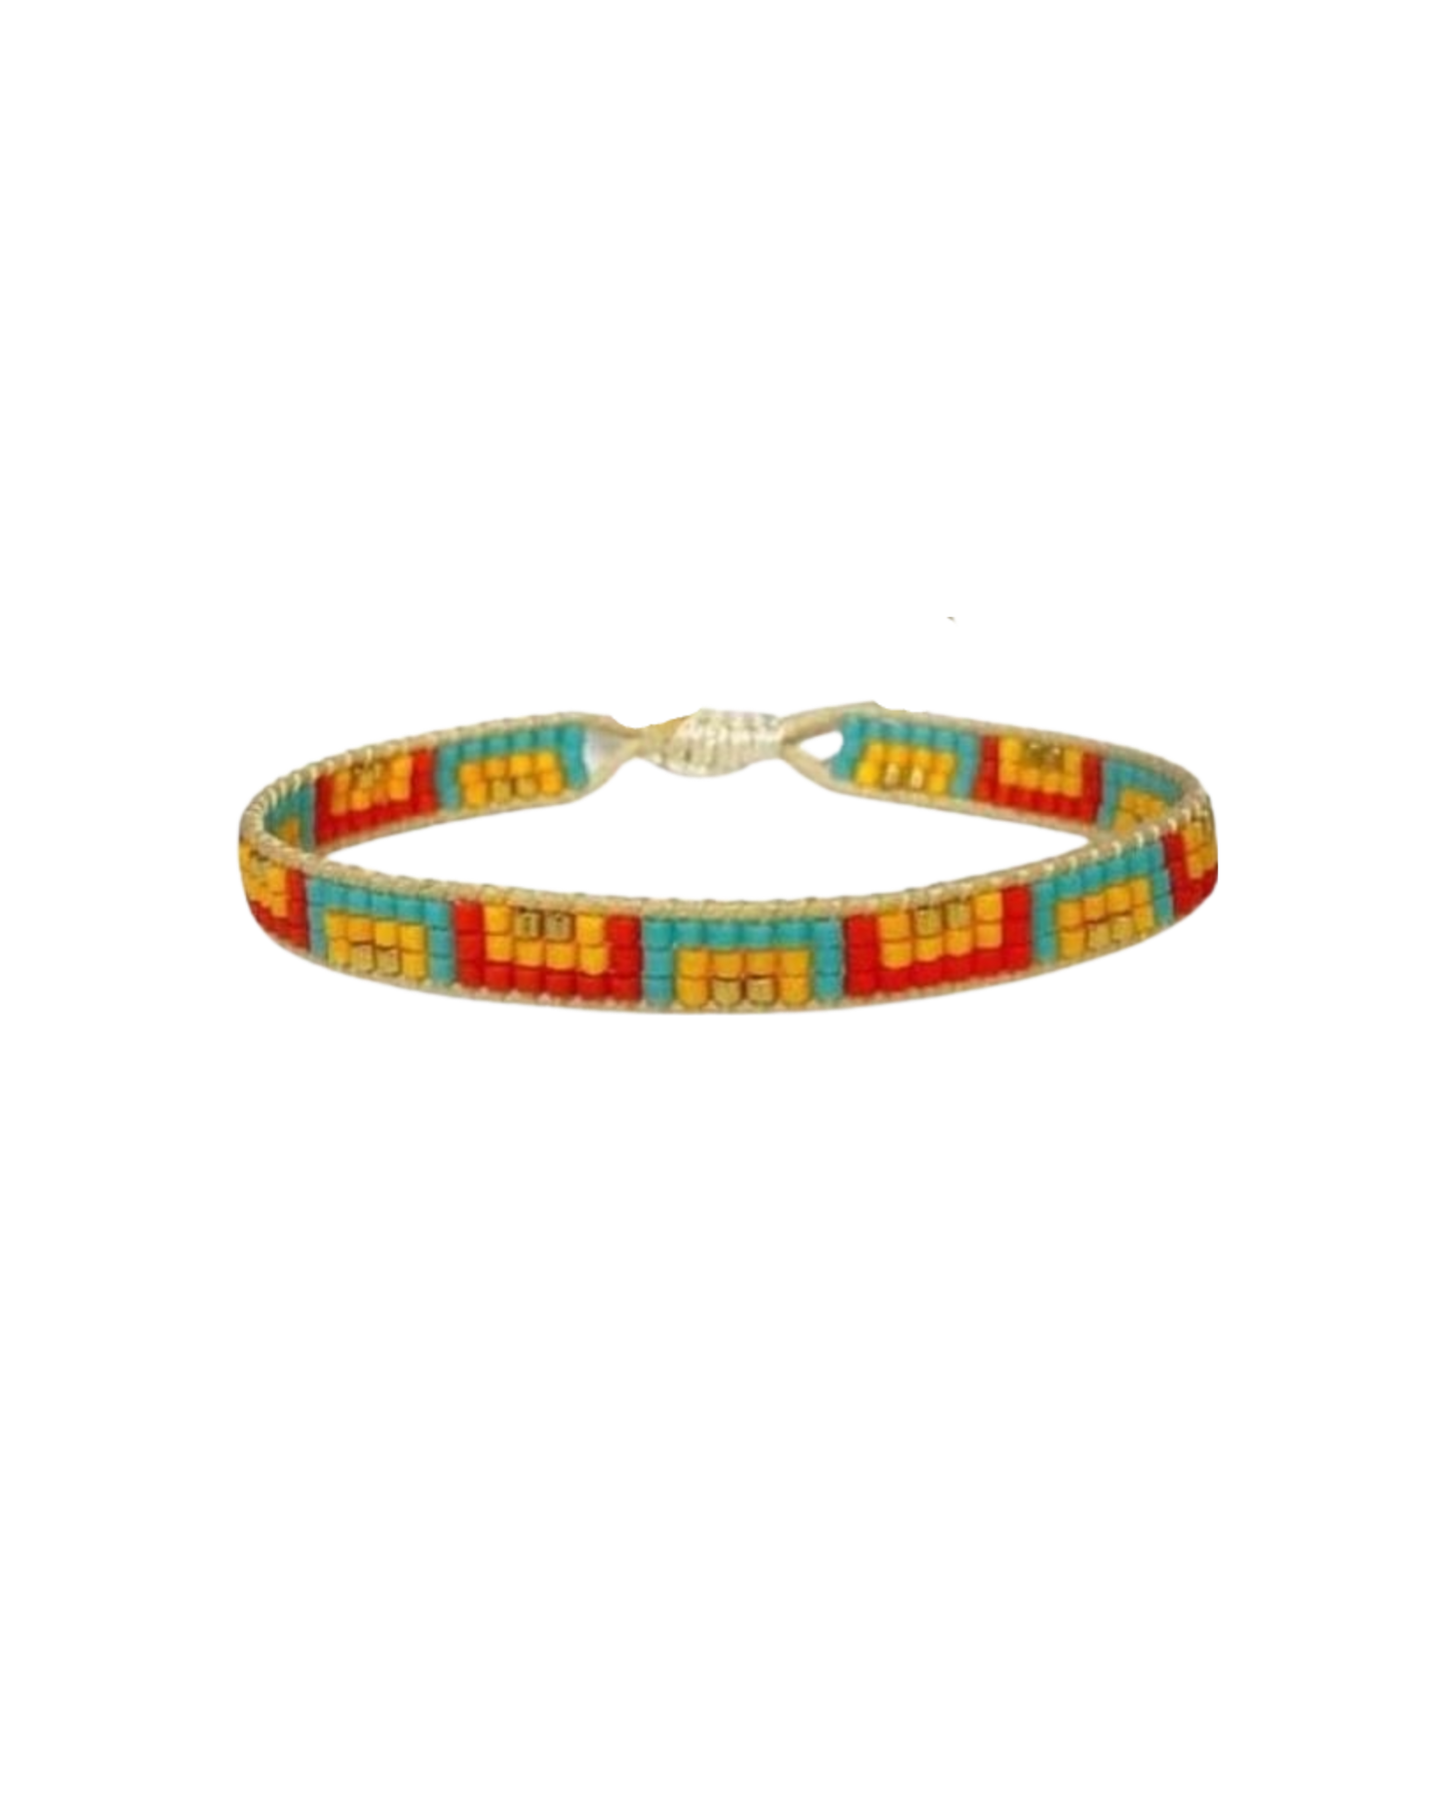 colorful beaded mexican bracelet with geometric design